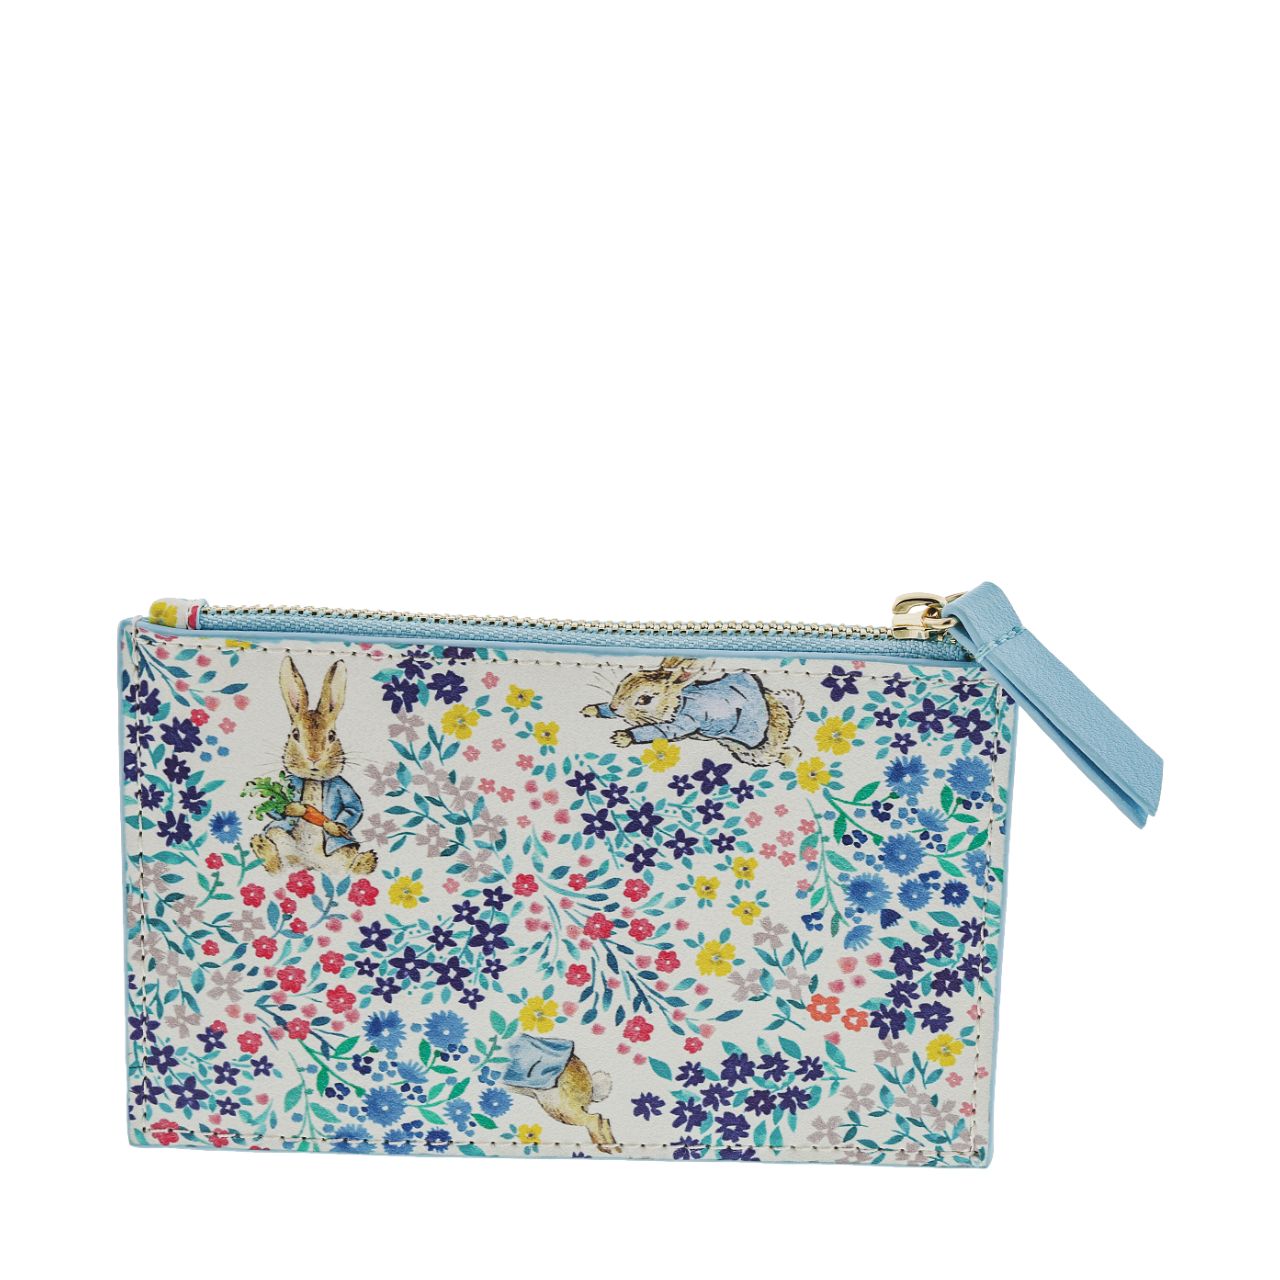 Beatrix Potter Peter Rabbit Garden Party Pop Up Purse  This beautiful Peter Rabbit Garden Party Pop Up Purse features a new design with 4 card holders and a zip top to keep all your loose change.